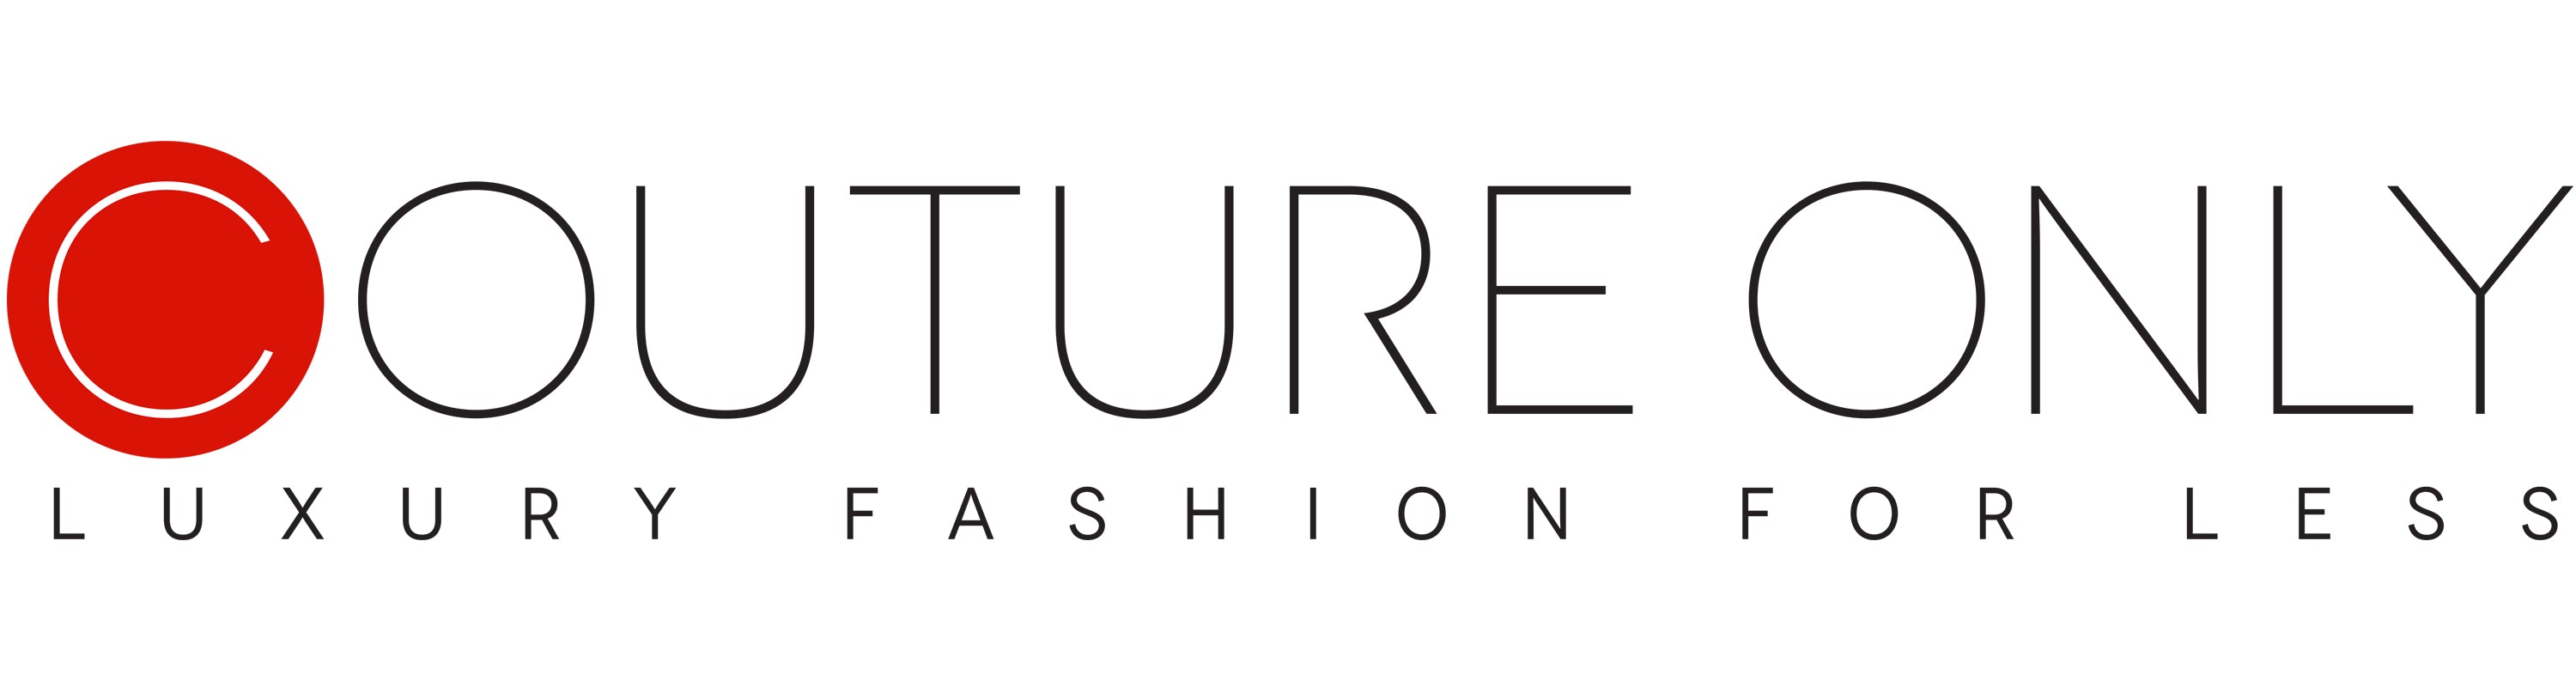 Couture Only Luxury Fashion For Less Logo